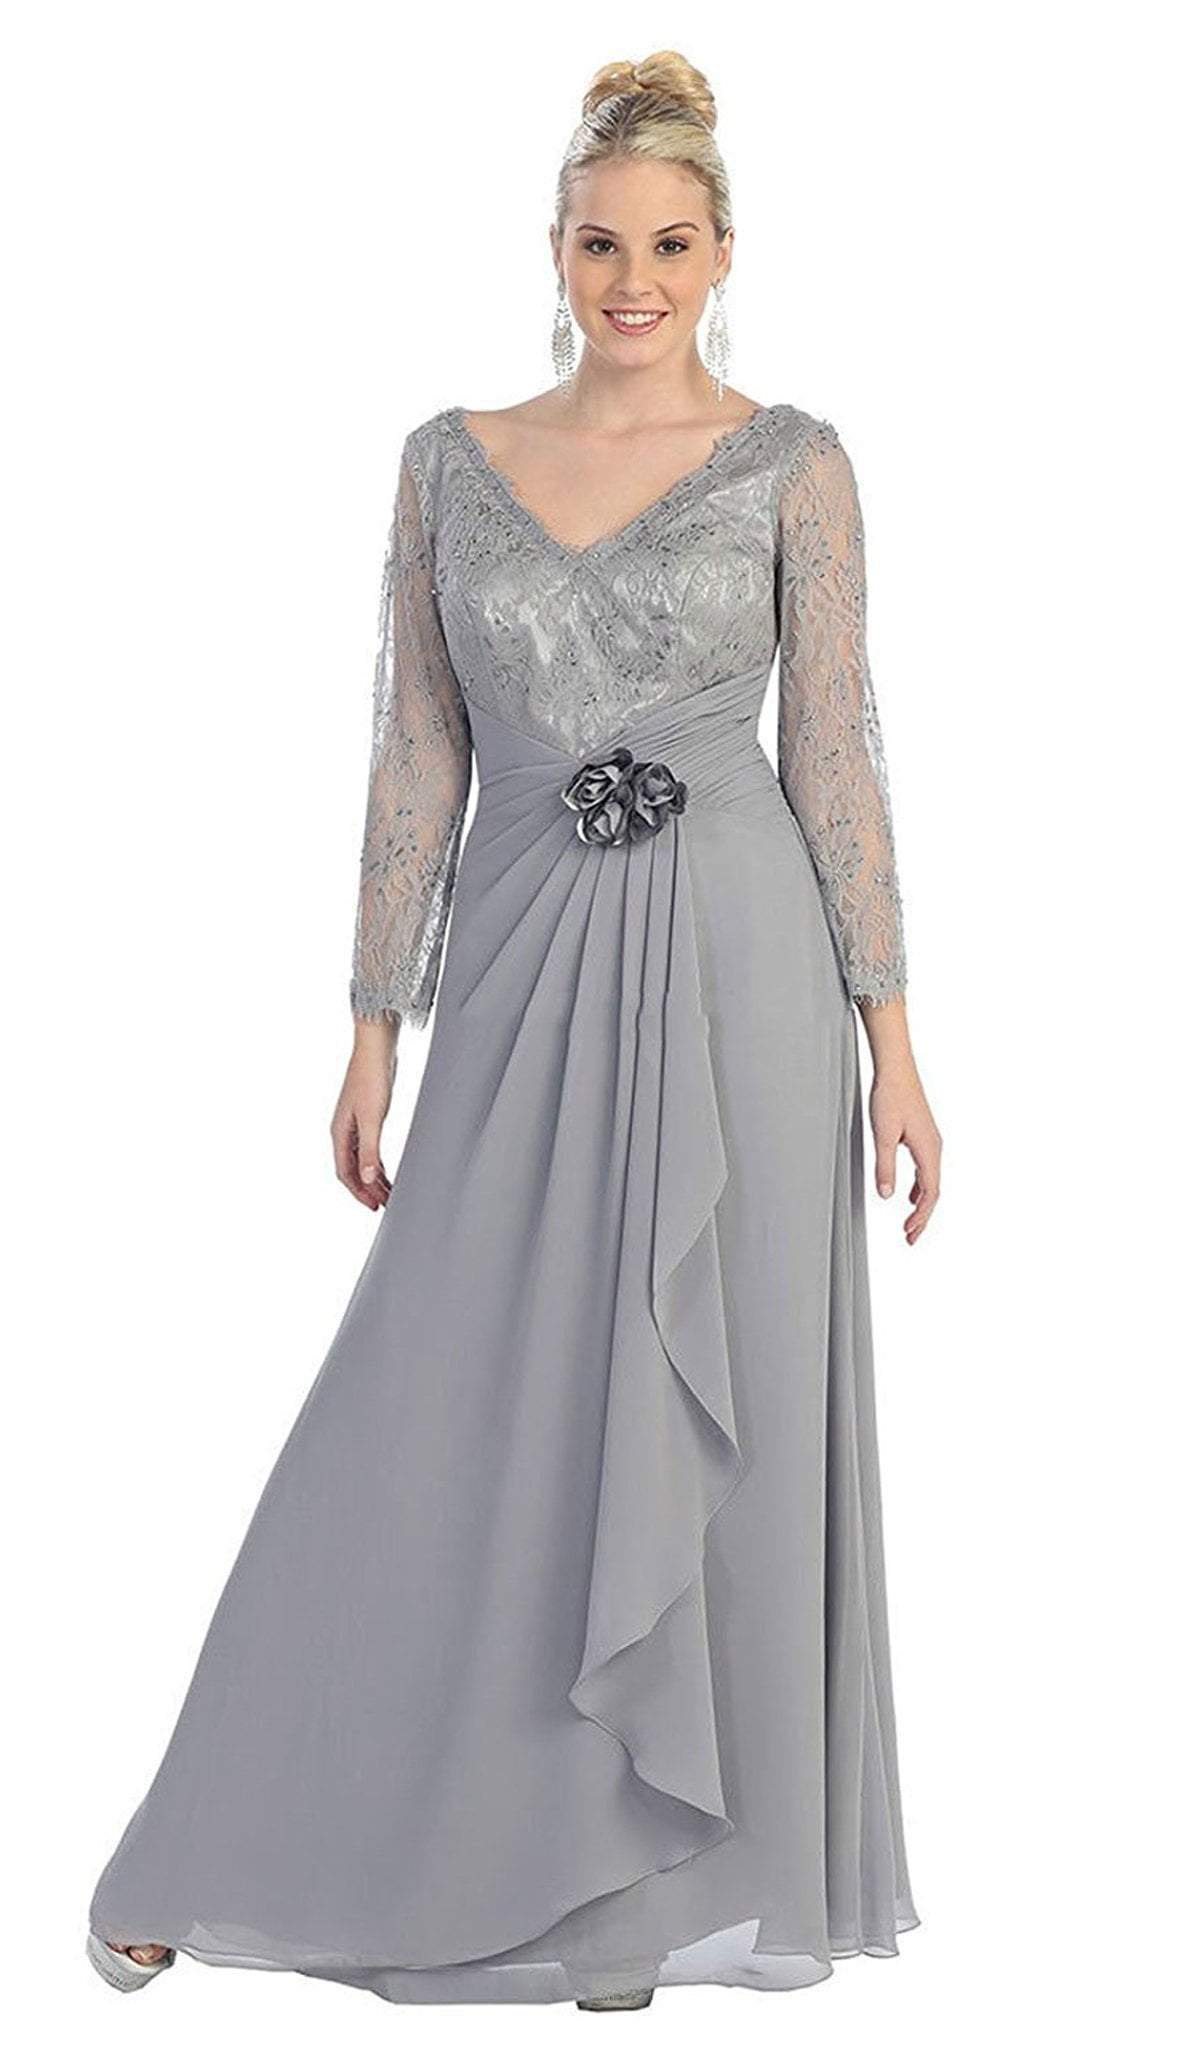 May Queen - Sheer Long Sleeve Floral Accented A-Line Evening Dress Special Occasion Dress M / Silver